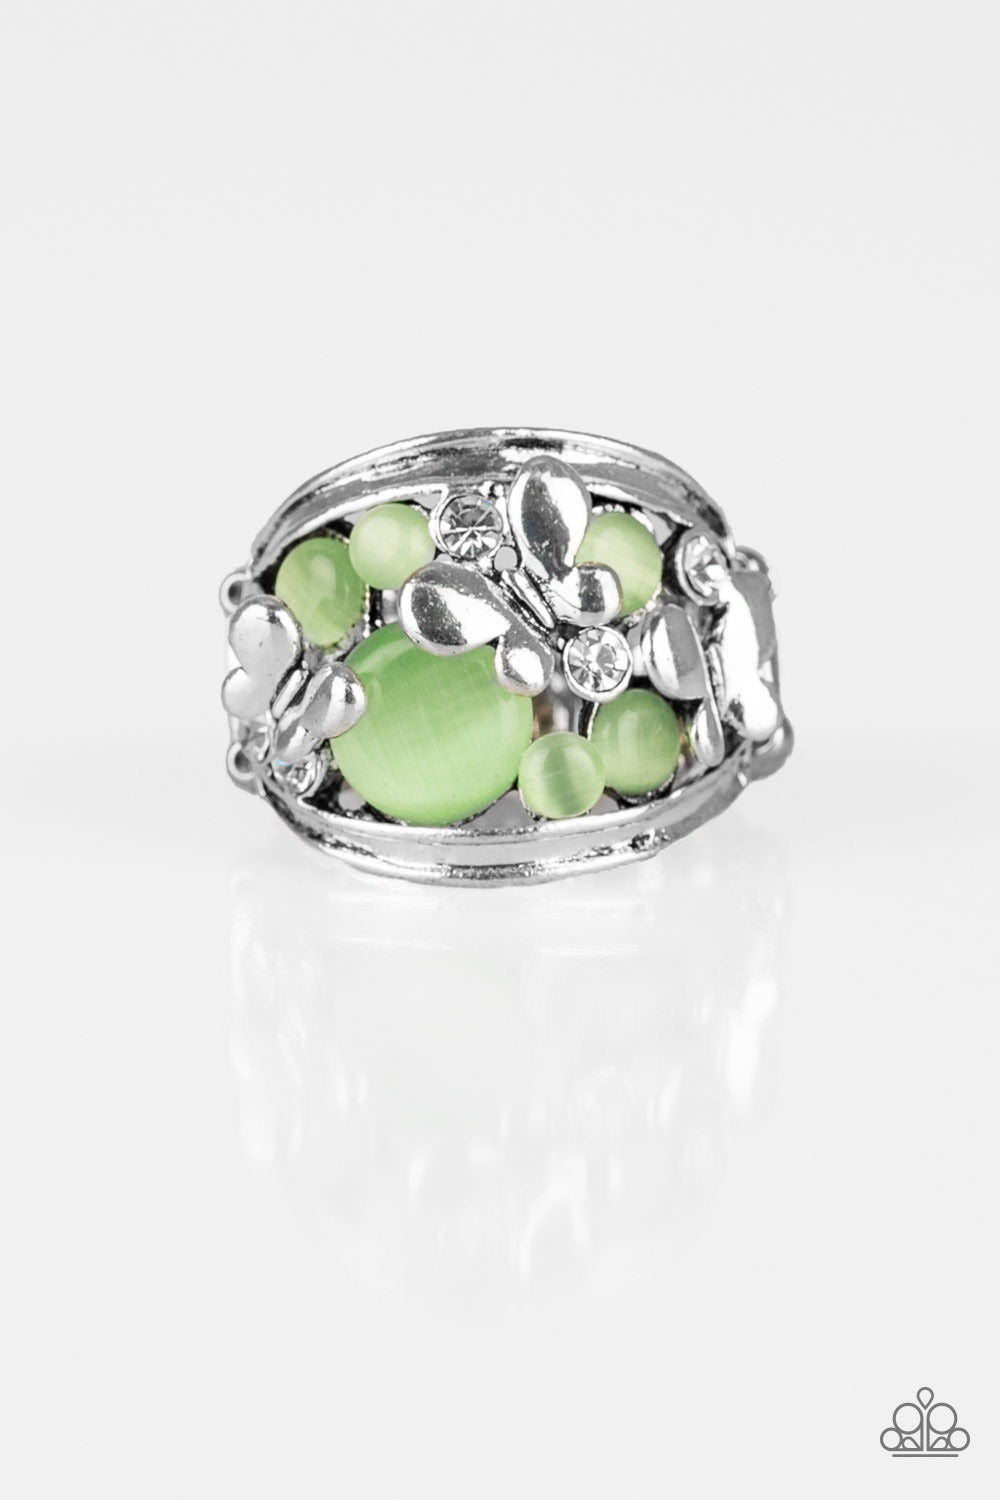 Paparazzi Rings FLUTTER Me Up - Green